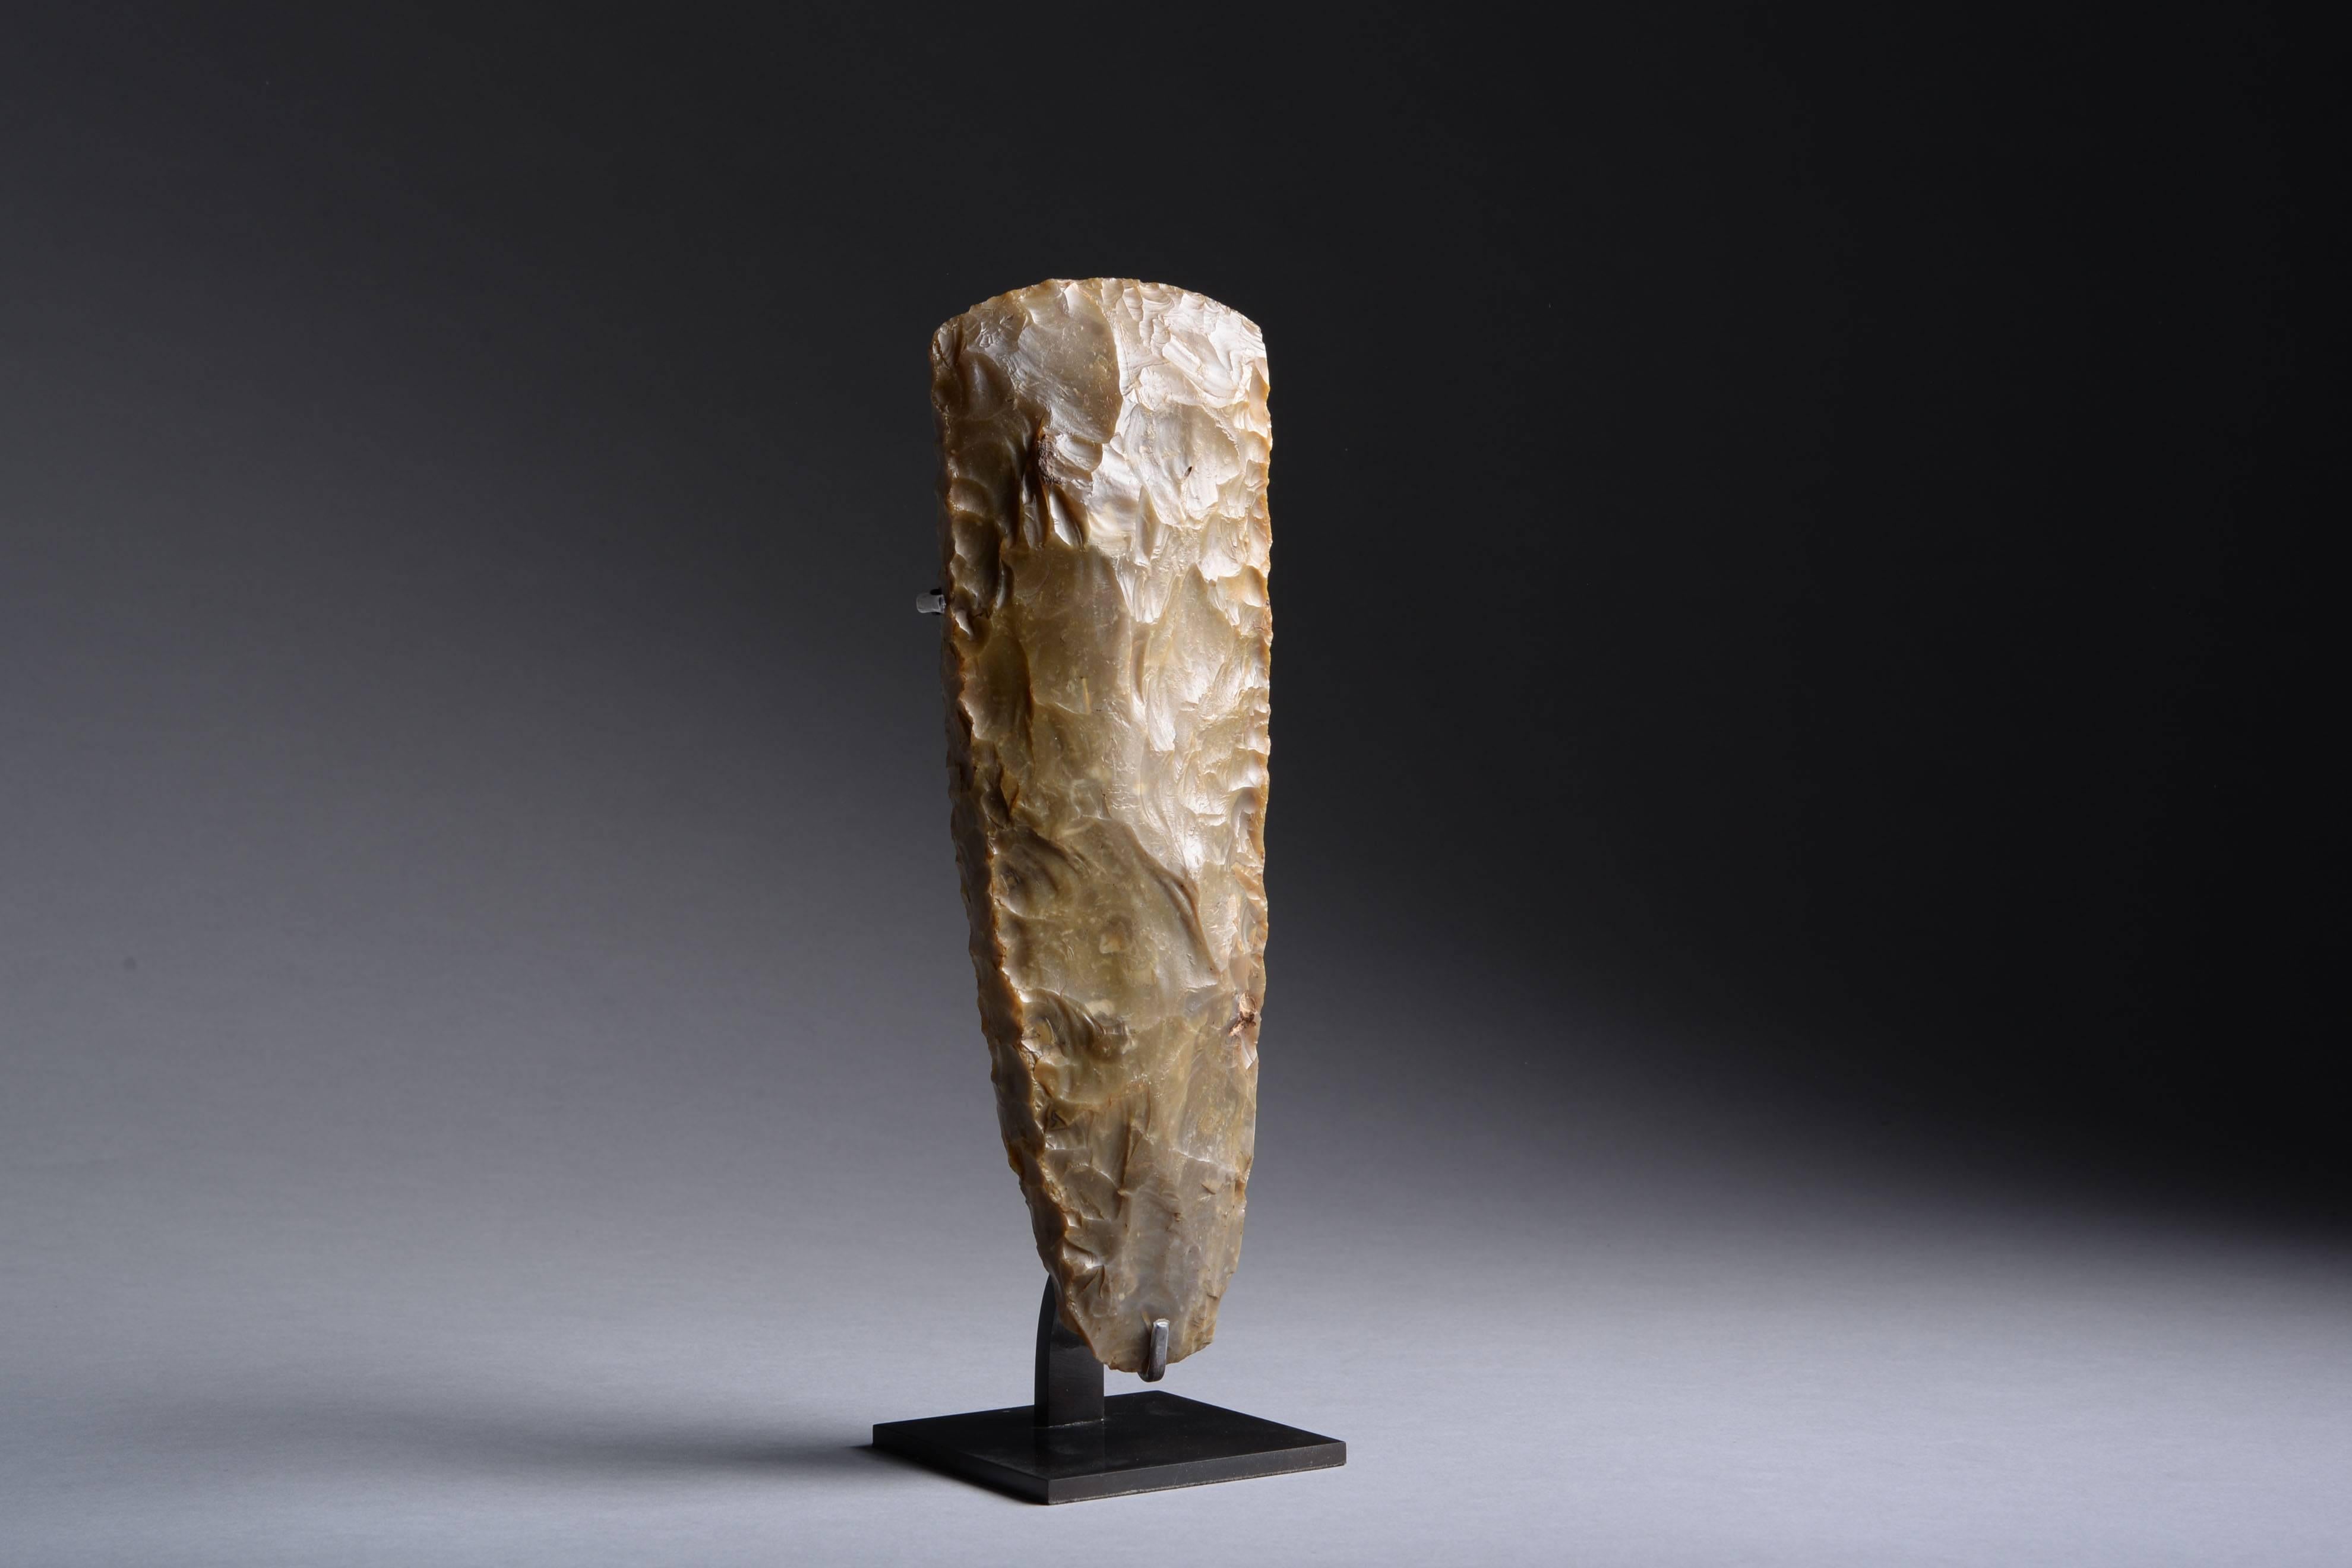 A large Neolithic thin-butted flint axe from Denmark, dating to approximately 4000-3000 BC.

Finely knapped from a large piece of greenish-grey flint, the sides with beautiful 'stitching' marks. 

This tactile stone tool dates to the north-west